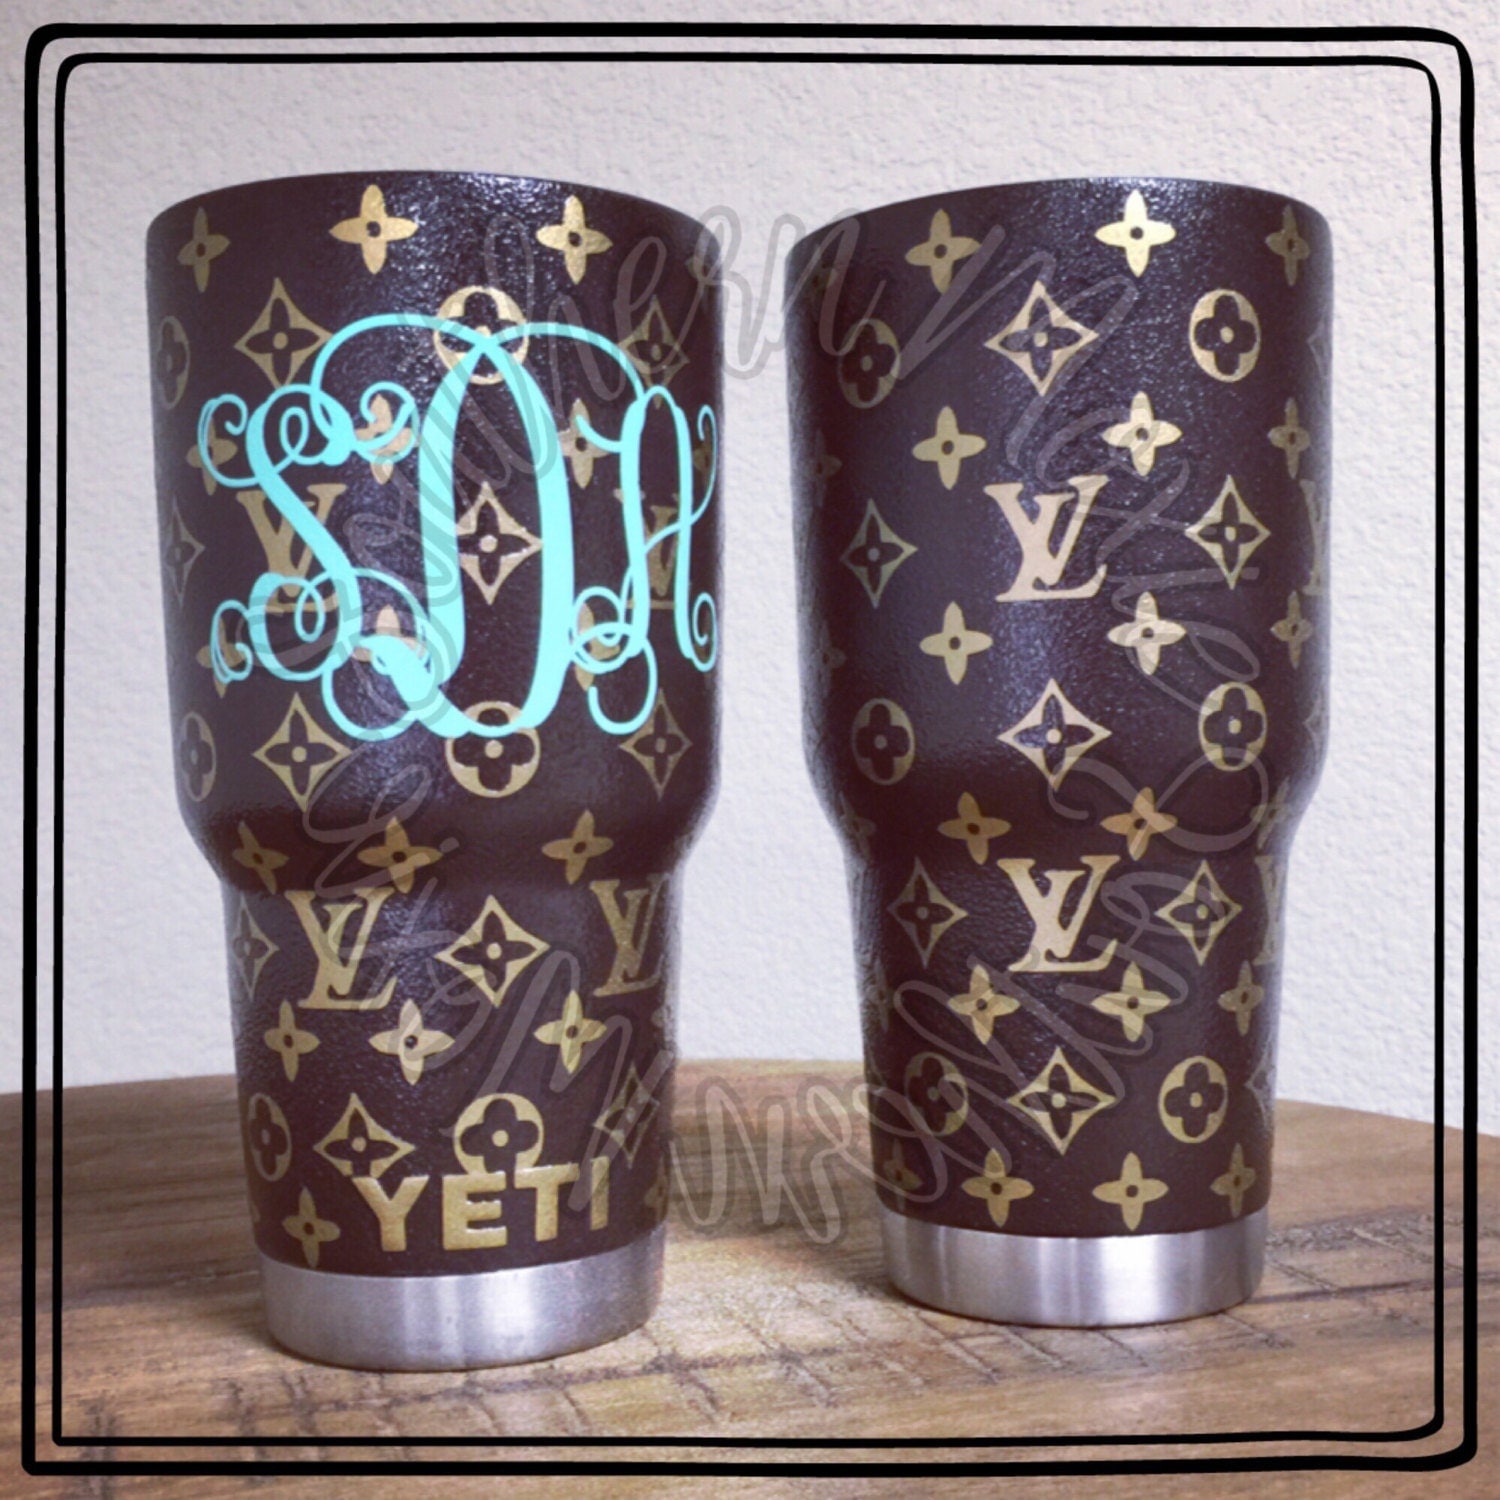 Louis Vuitton-inspired customized Yeti cups